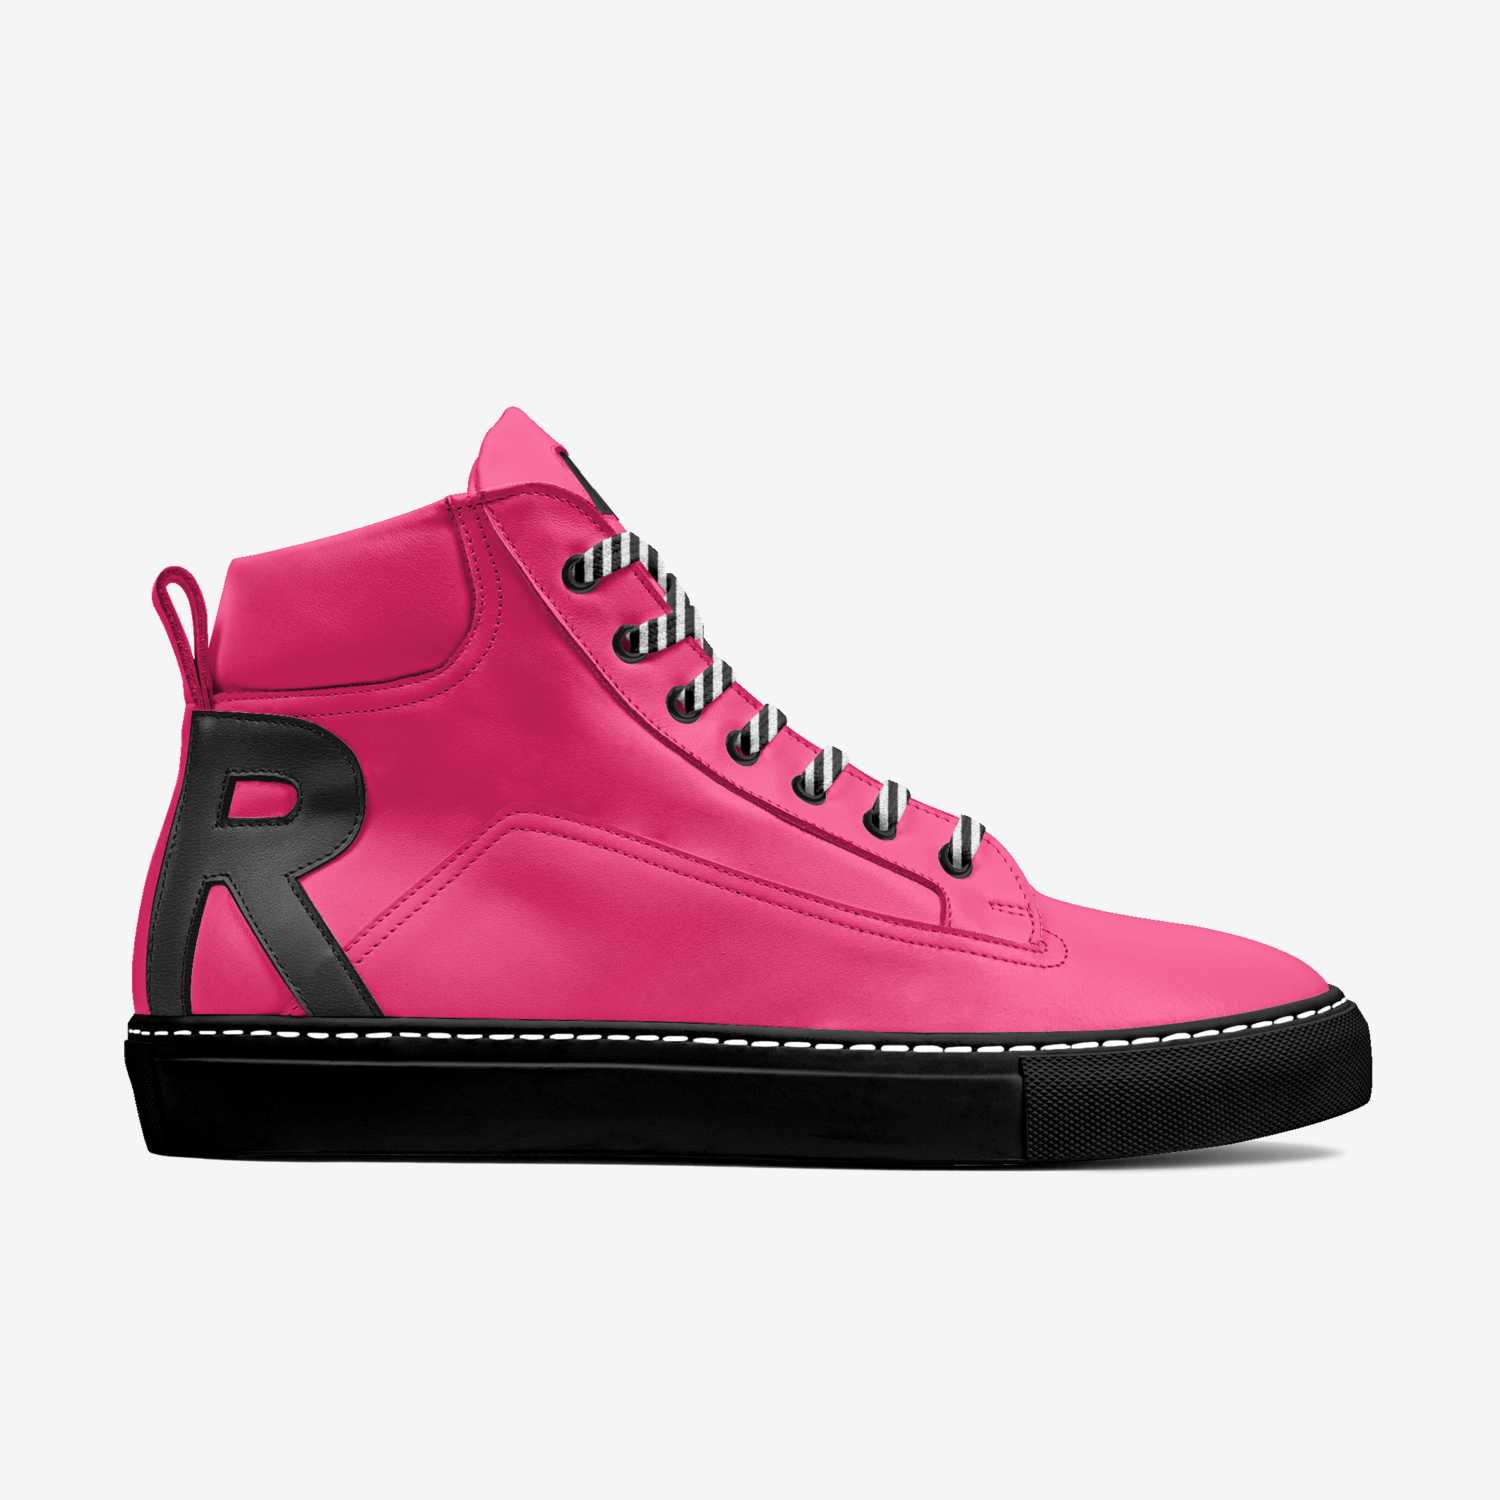 O.G. RIDDICK [Pink Silicon] - Riddick Shoes Shoe Riddick Shoes   